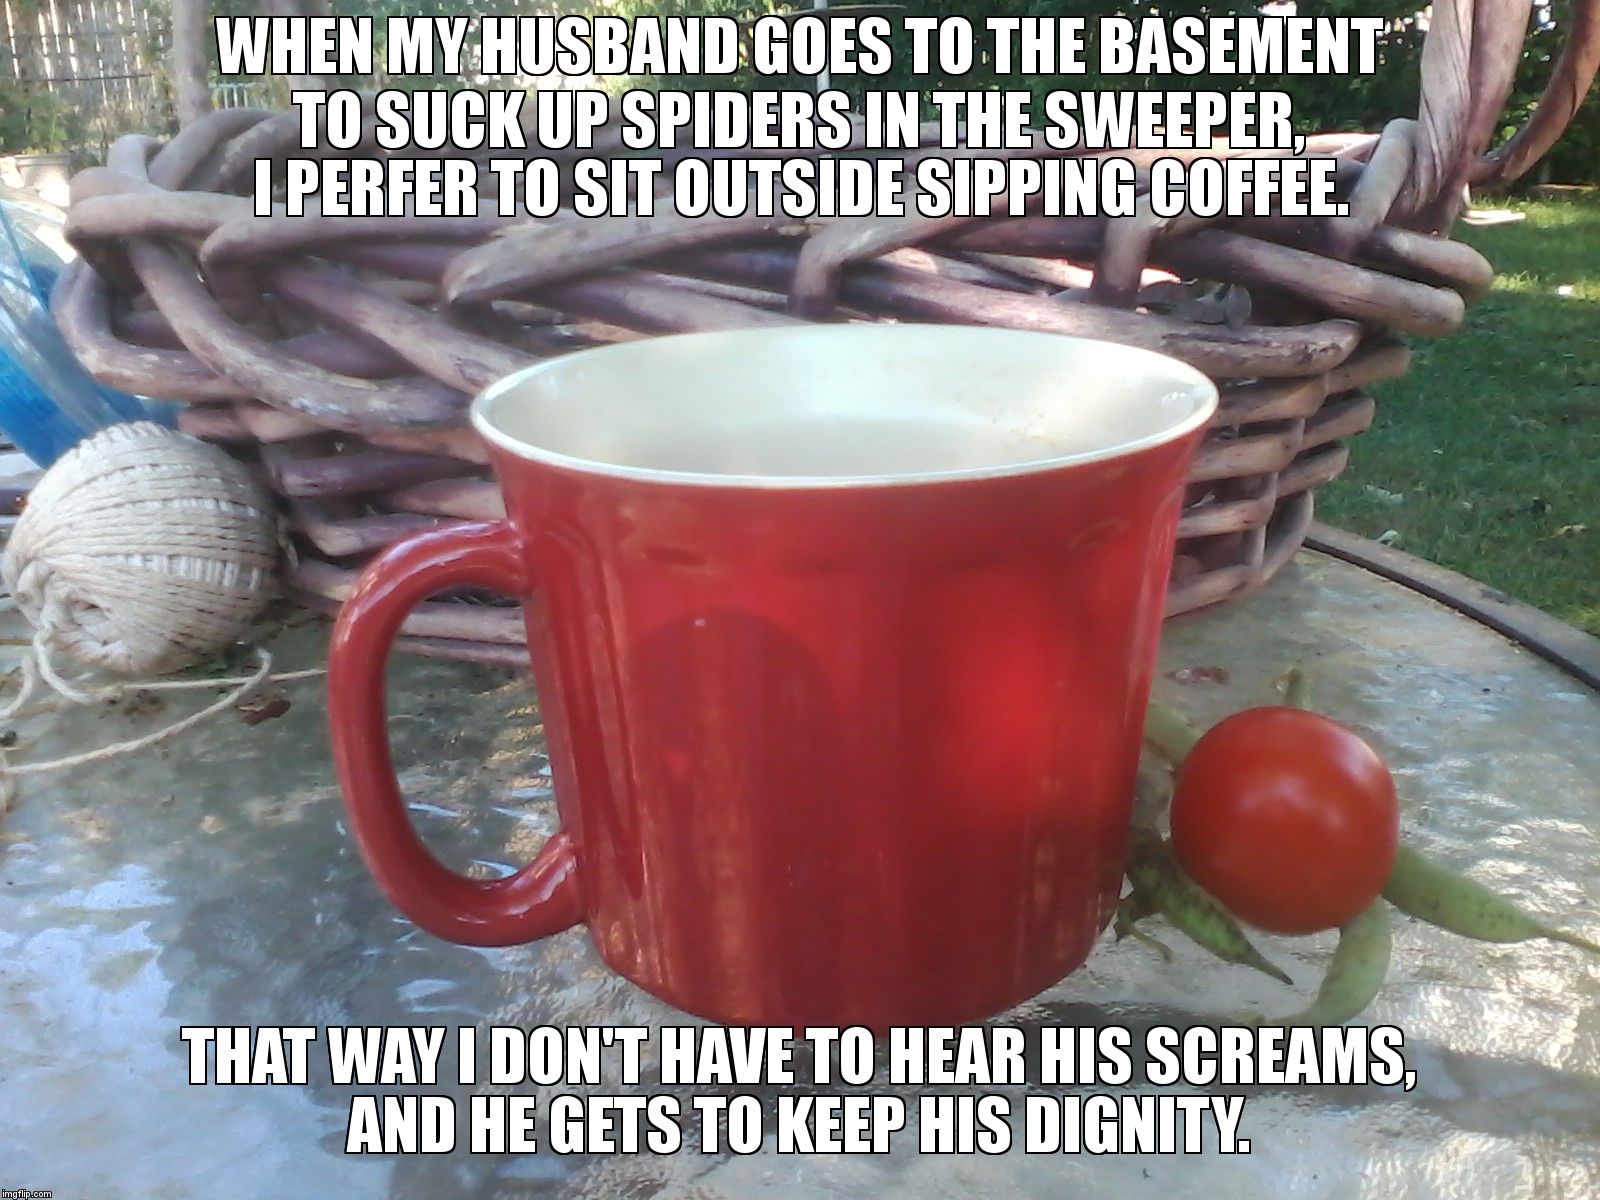 WHEN MY HUSBAND GOES TO THE BASEMENT TO SUCK UP SPIDERS IN THE SWEEPER, I PERFER TO SIT OUTSIDE SIPPING COFFEE. THAT WAY I DON'T HAVE TO HEA | image tagged in dignity | made w/ Imgflip meme maker